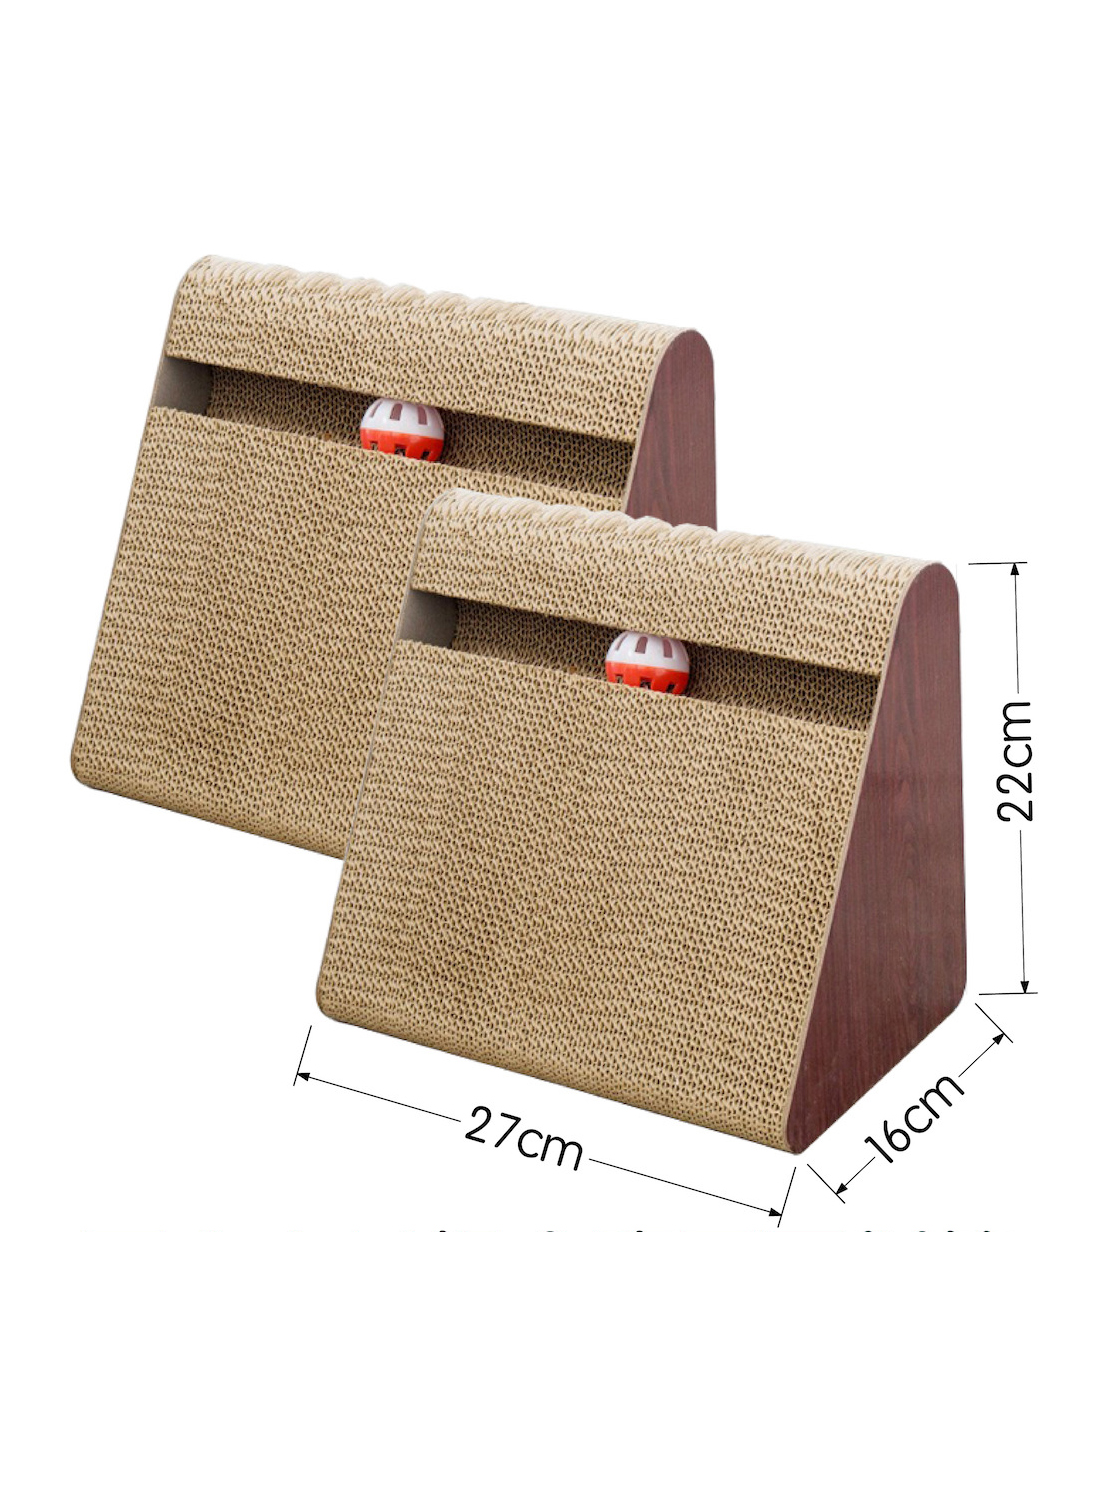 Triangle Cat Scratching Board Nest Sturdy High Density Corrugated Cardboard Claw Sharpener Wear-resistant Standing Wall Scratching Post (Small 27*22*16cm)